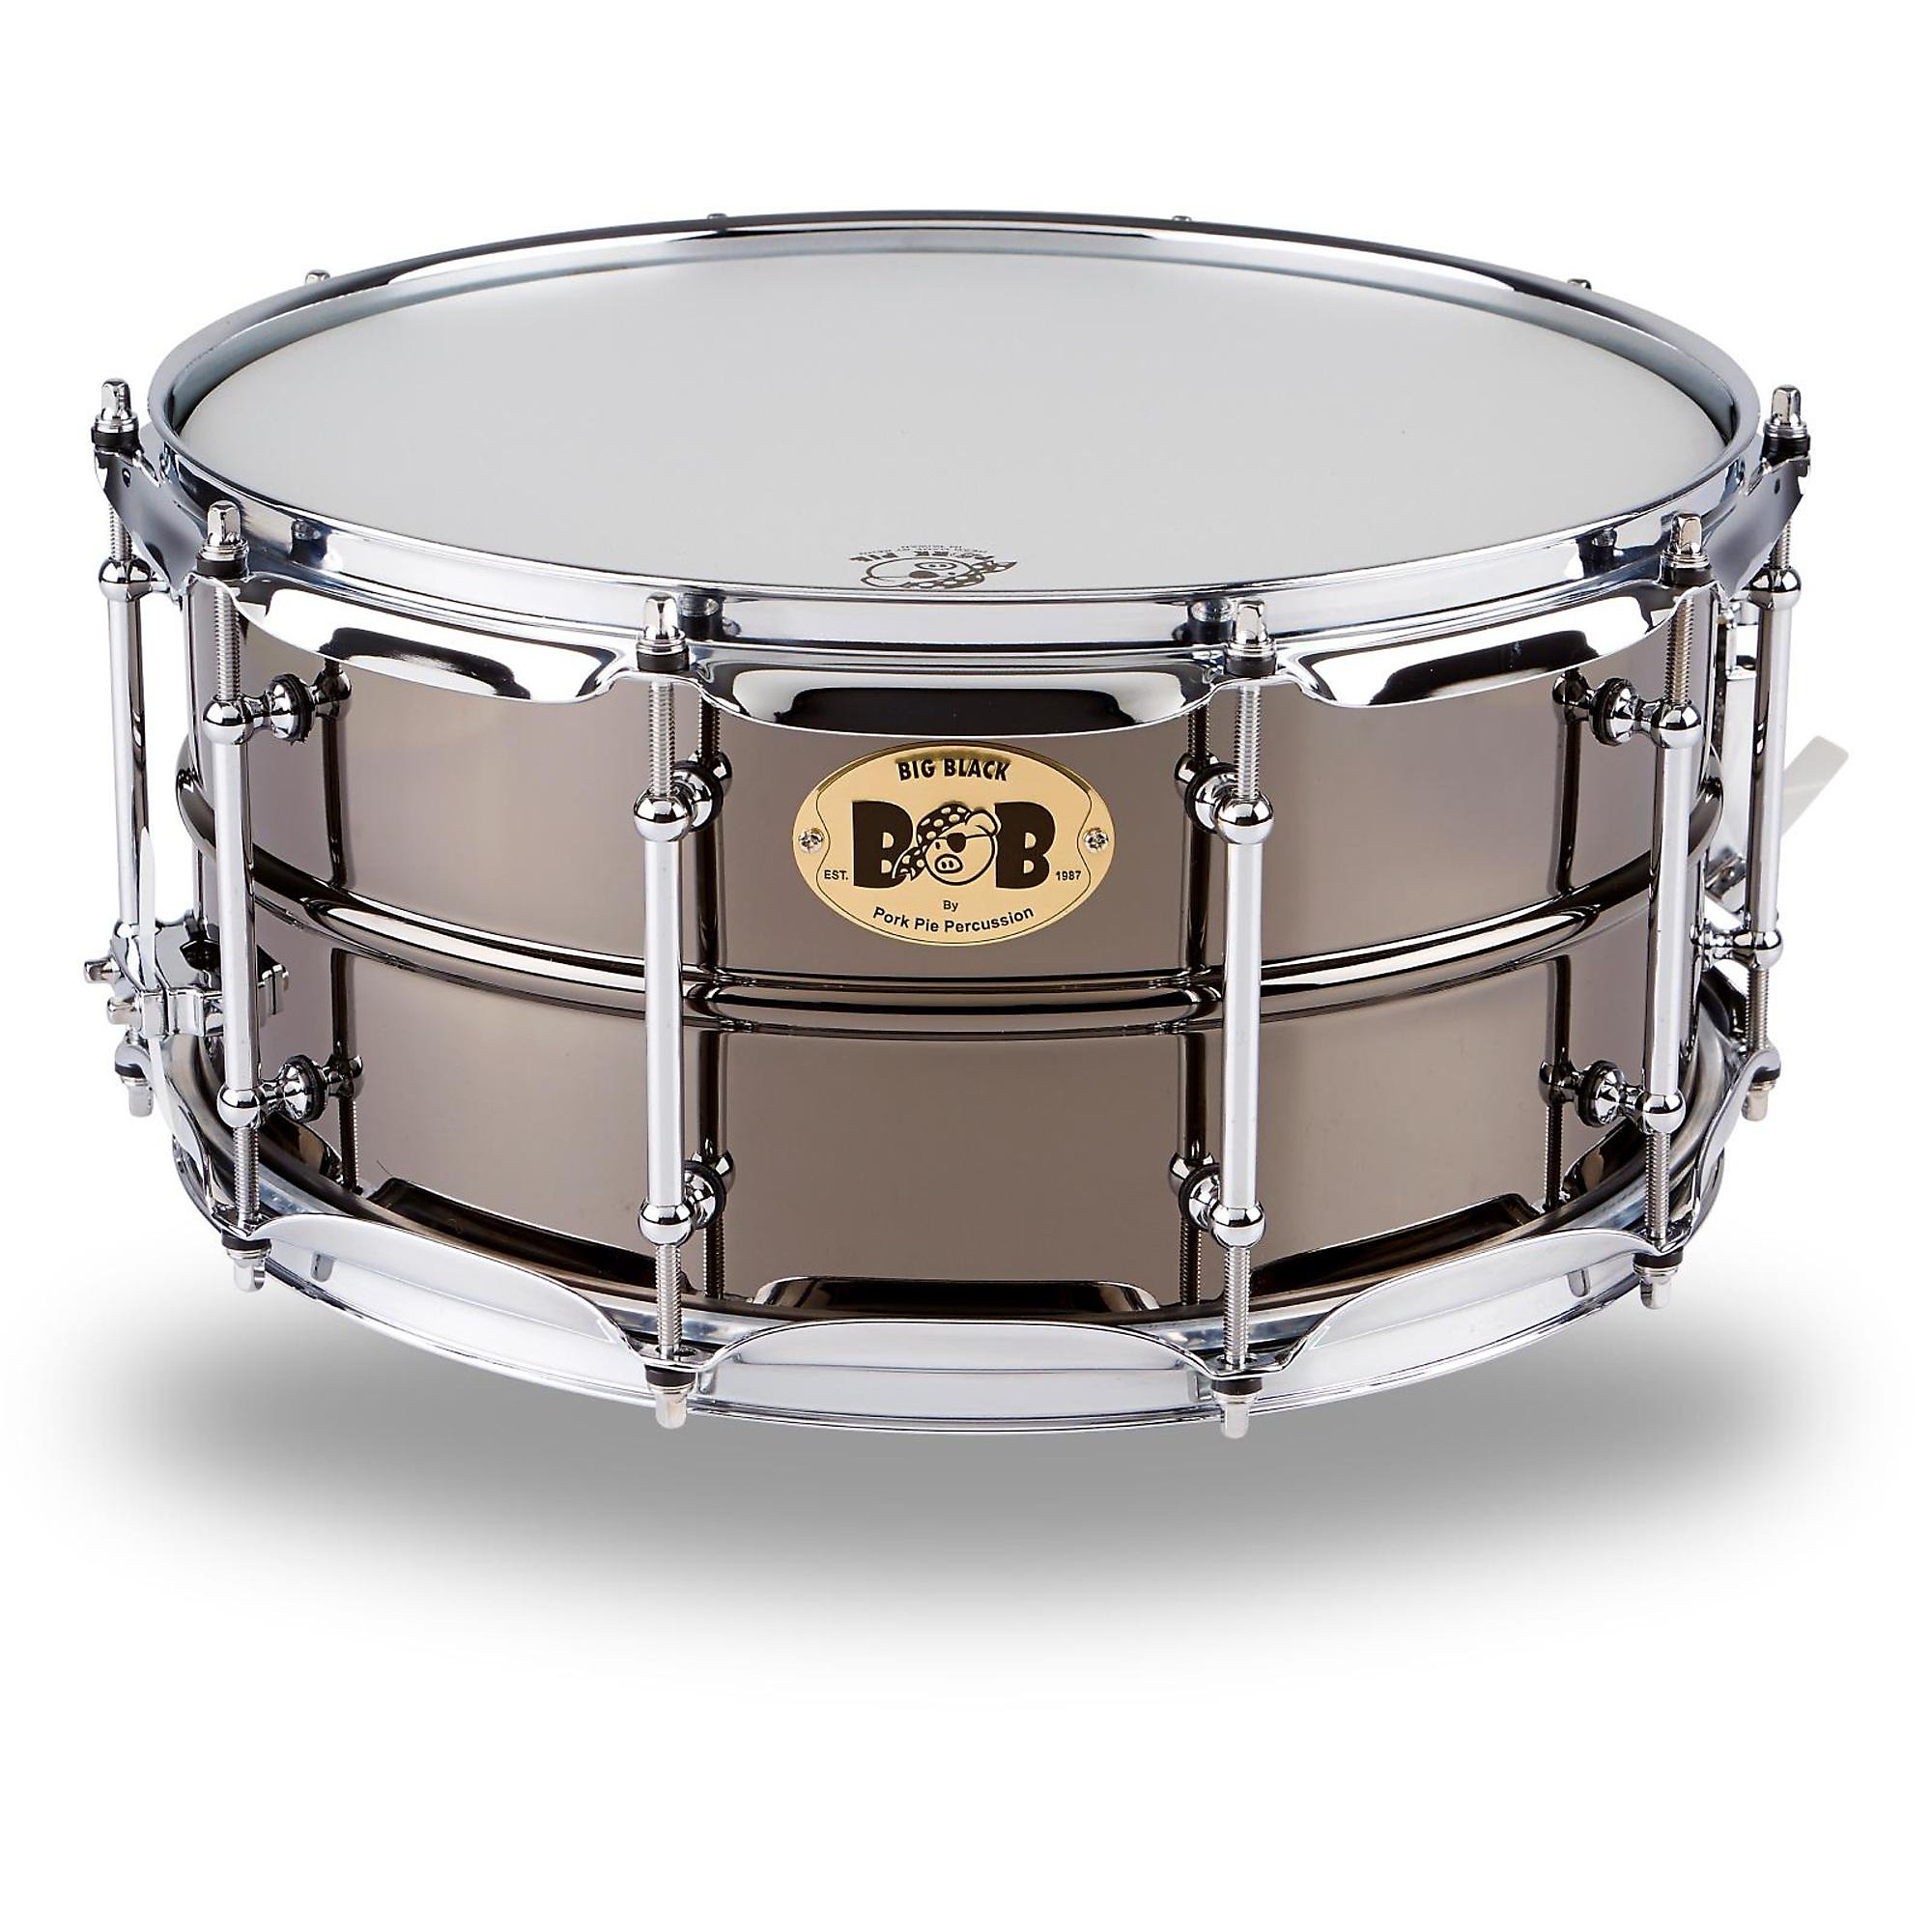 Pork Pie Big Black Brass Snare Drum With Tube Lugs and Chrome Hardware  Black 14 x 6.5 in. Guitar Center